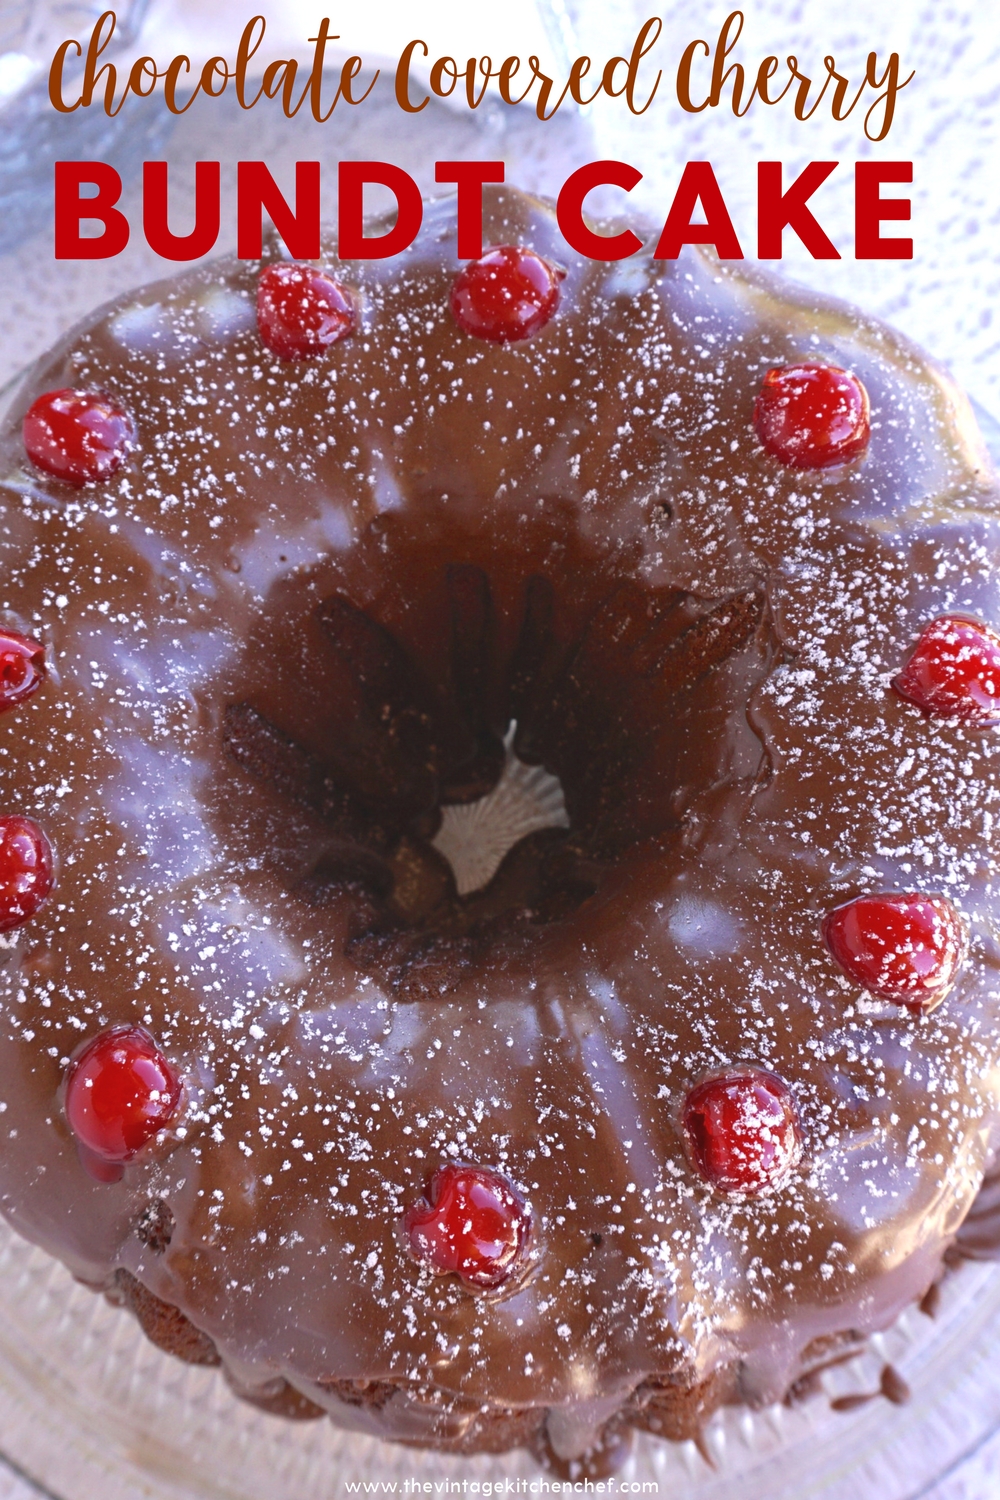 Chocolate Covered Cherry Bundt Cake is easy to make and looks and tastes delightful! It's a large, rich and moist cake that's great for any occasion.